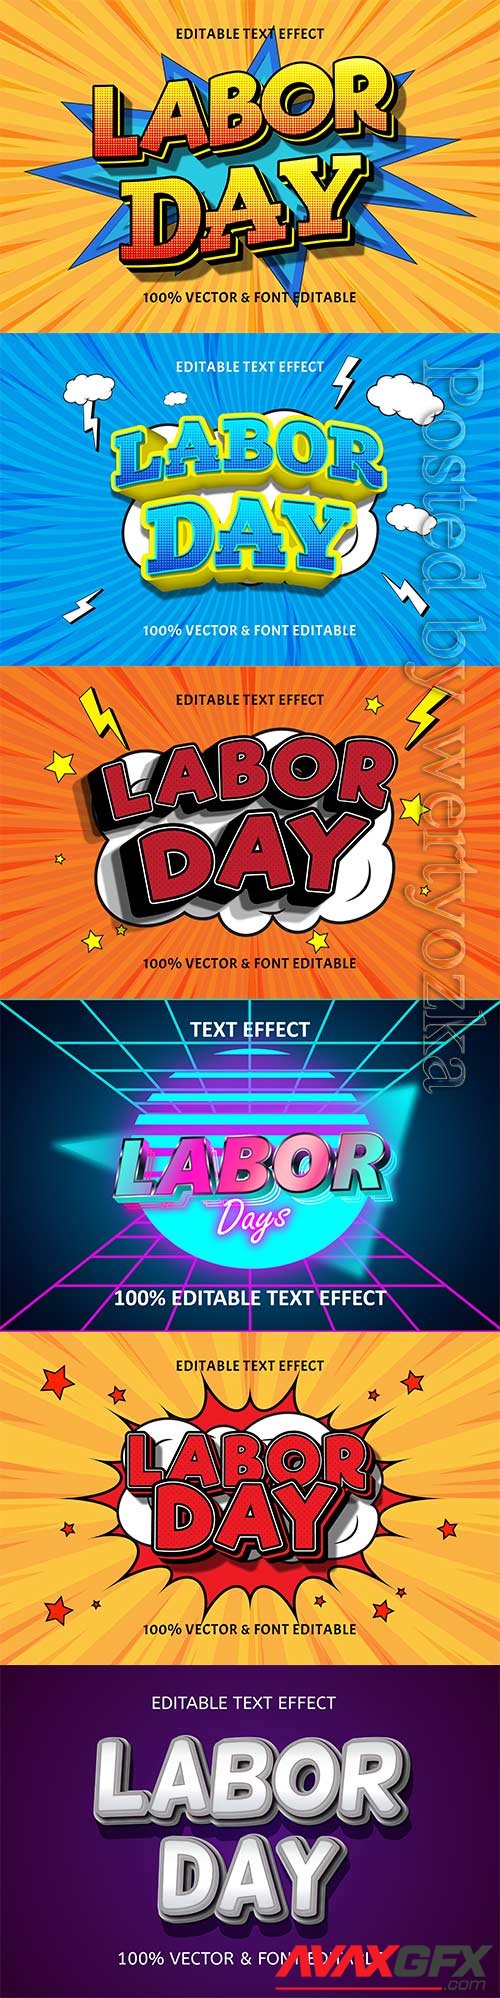 Labor day editable text effect vol 11